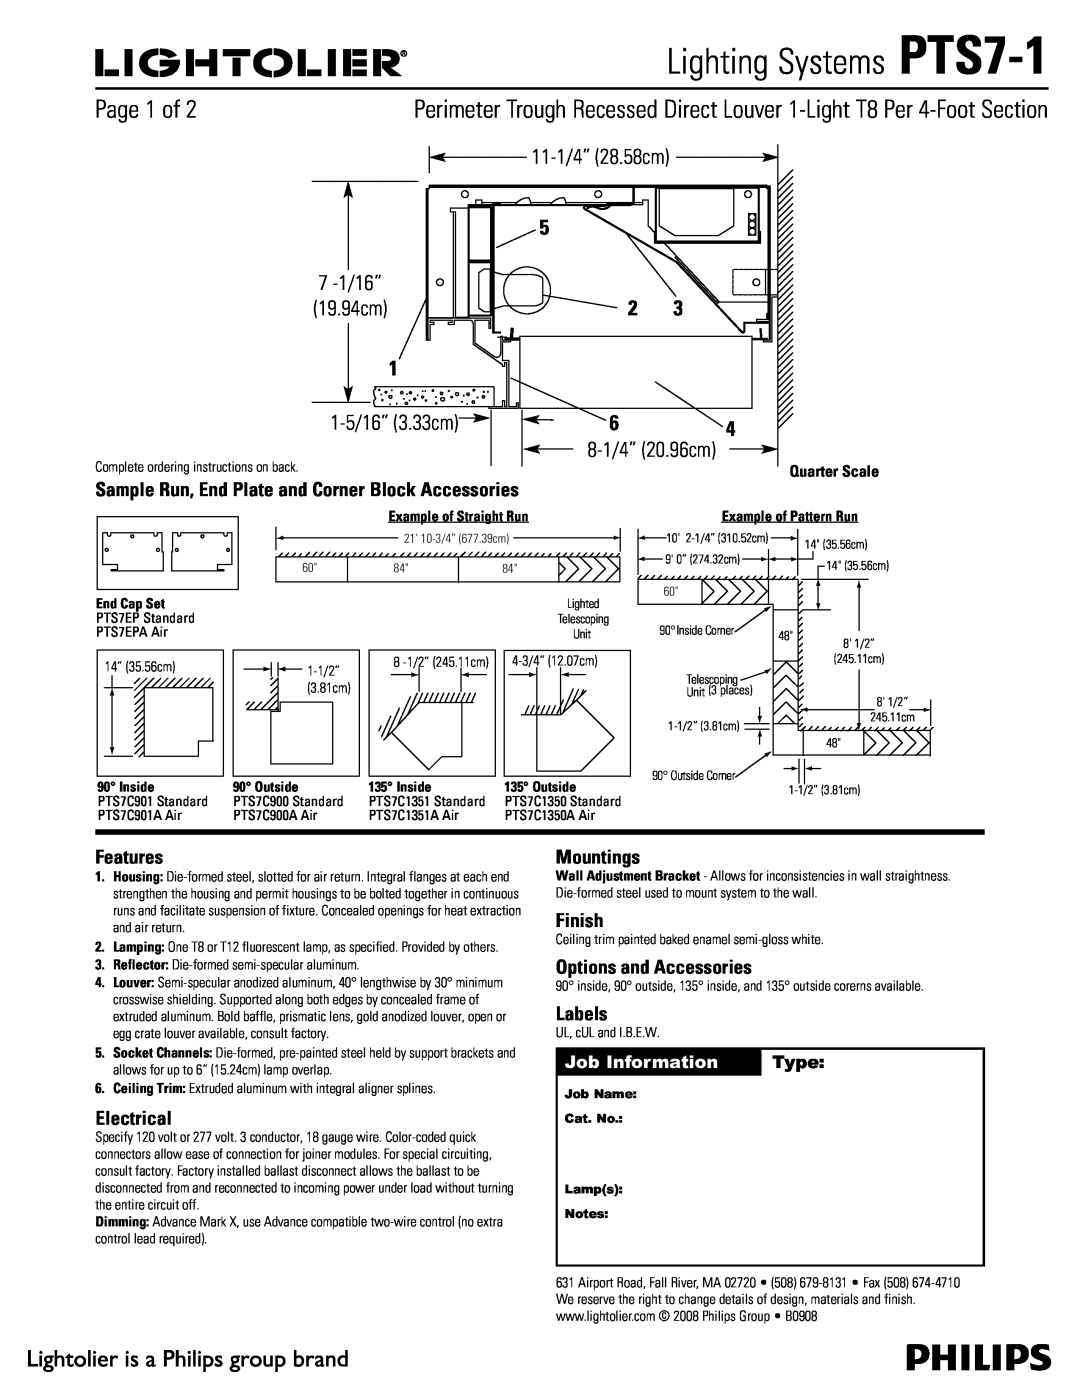 Lightolier manual Lighting Systems PTS7-1, Features, Electrical, Mountings, Finish, Options and Accessories, Labels 